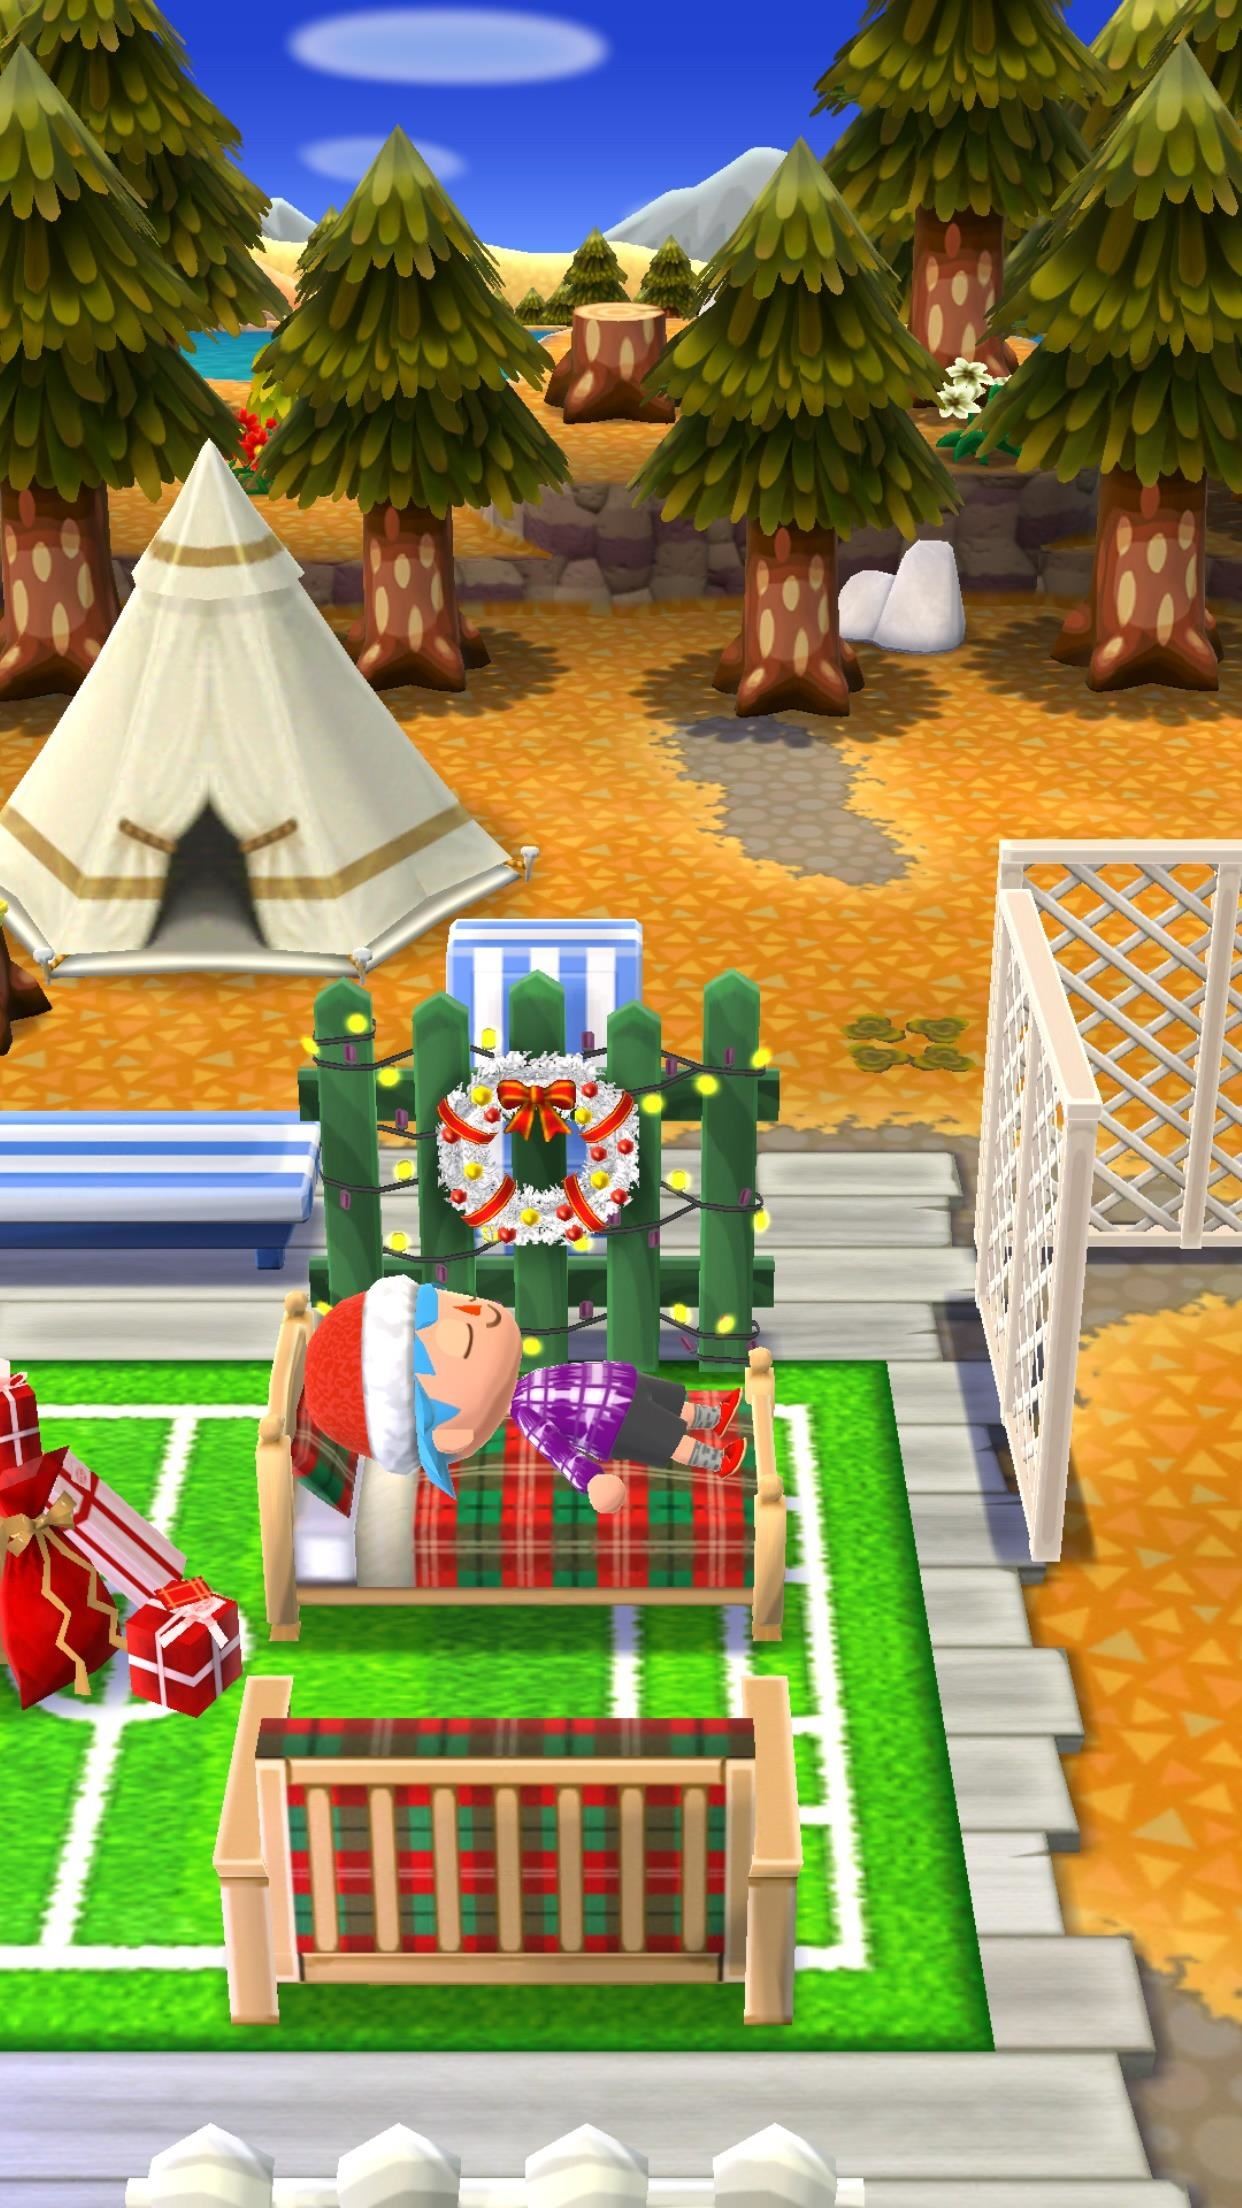 Pocket Camp 101: Grab Yourself a Full Santa Suit & Other Holiday Items in Animal Crossing